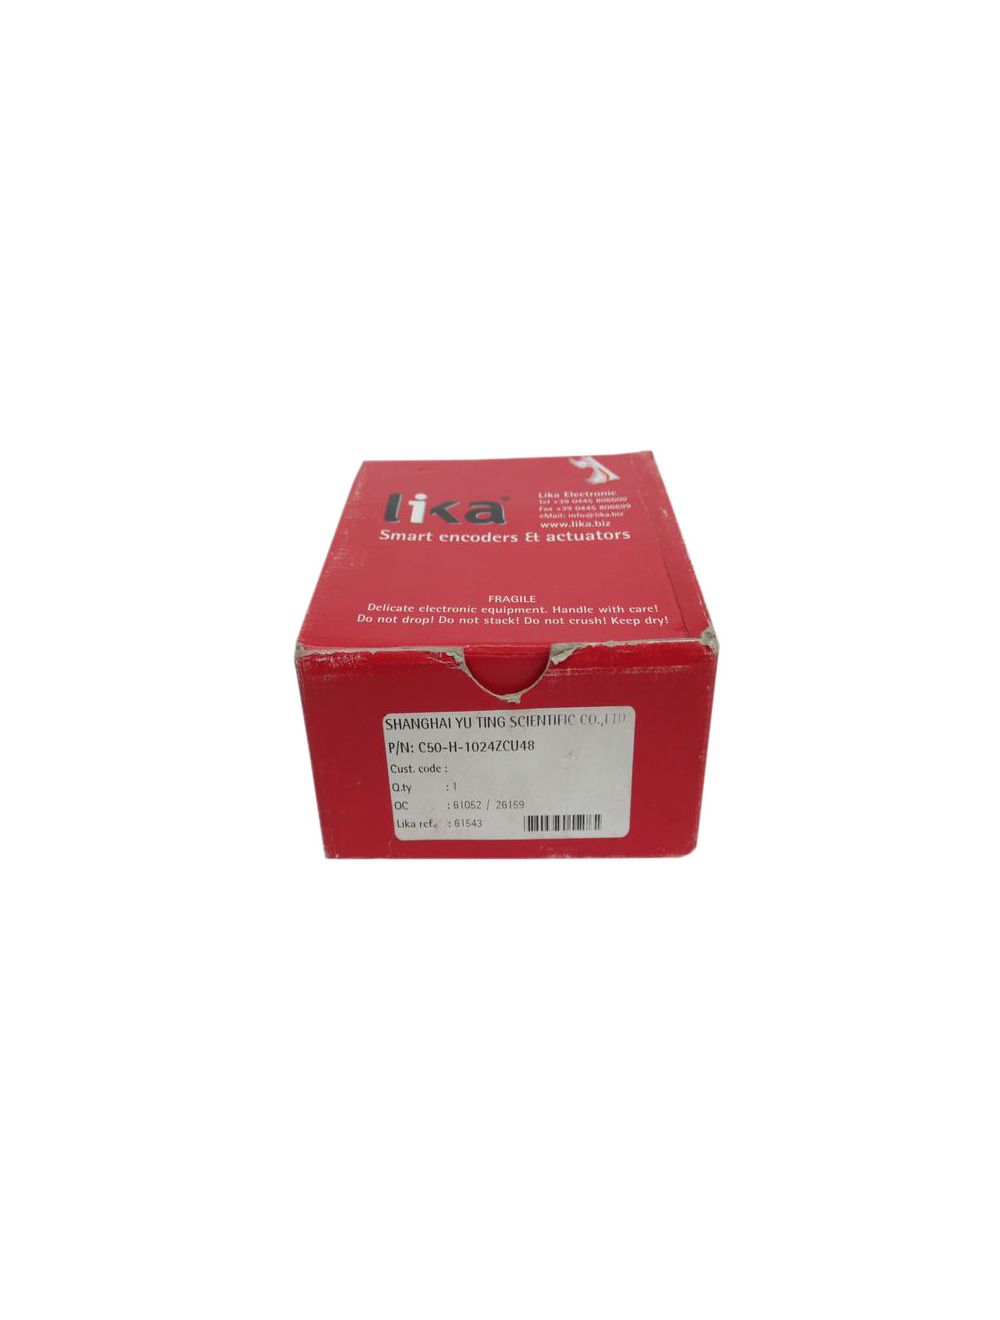 New In stock for sale, Lika Encoder C50-H-1024ZCU48